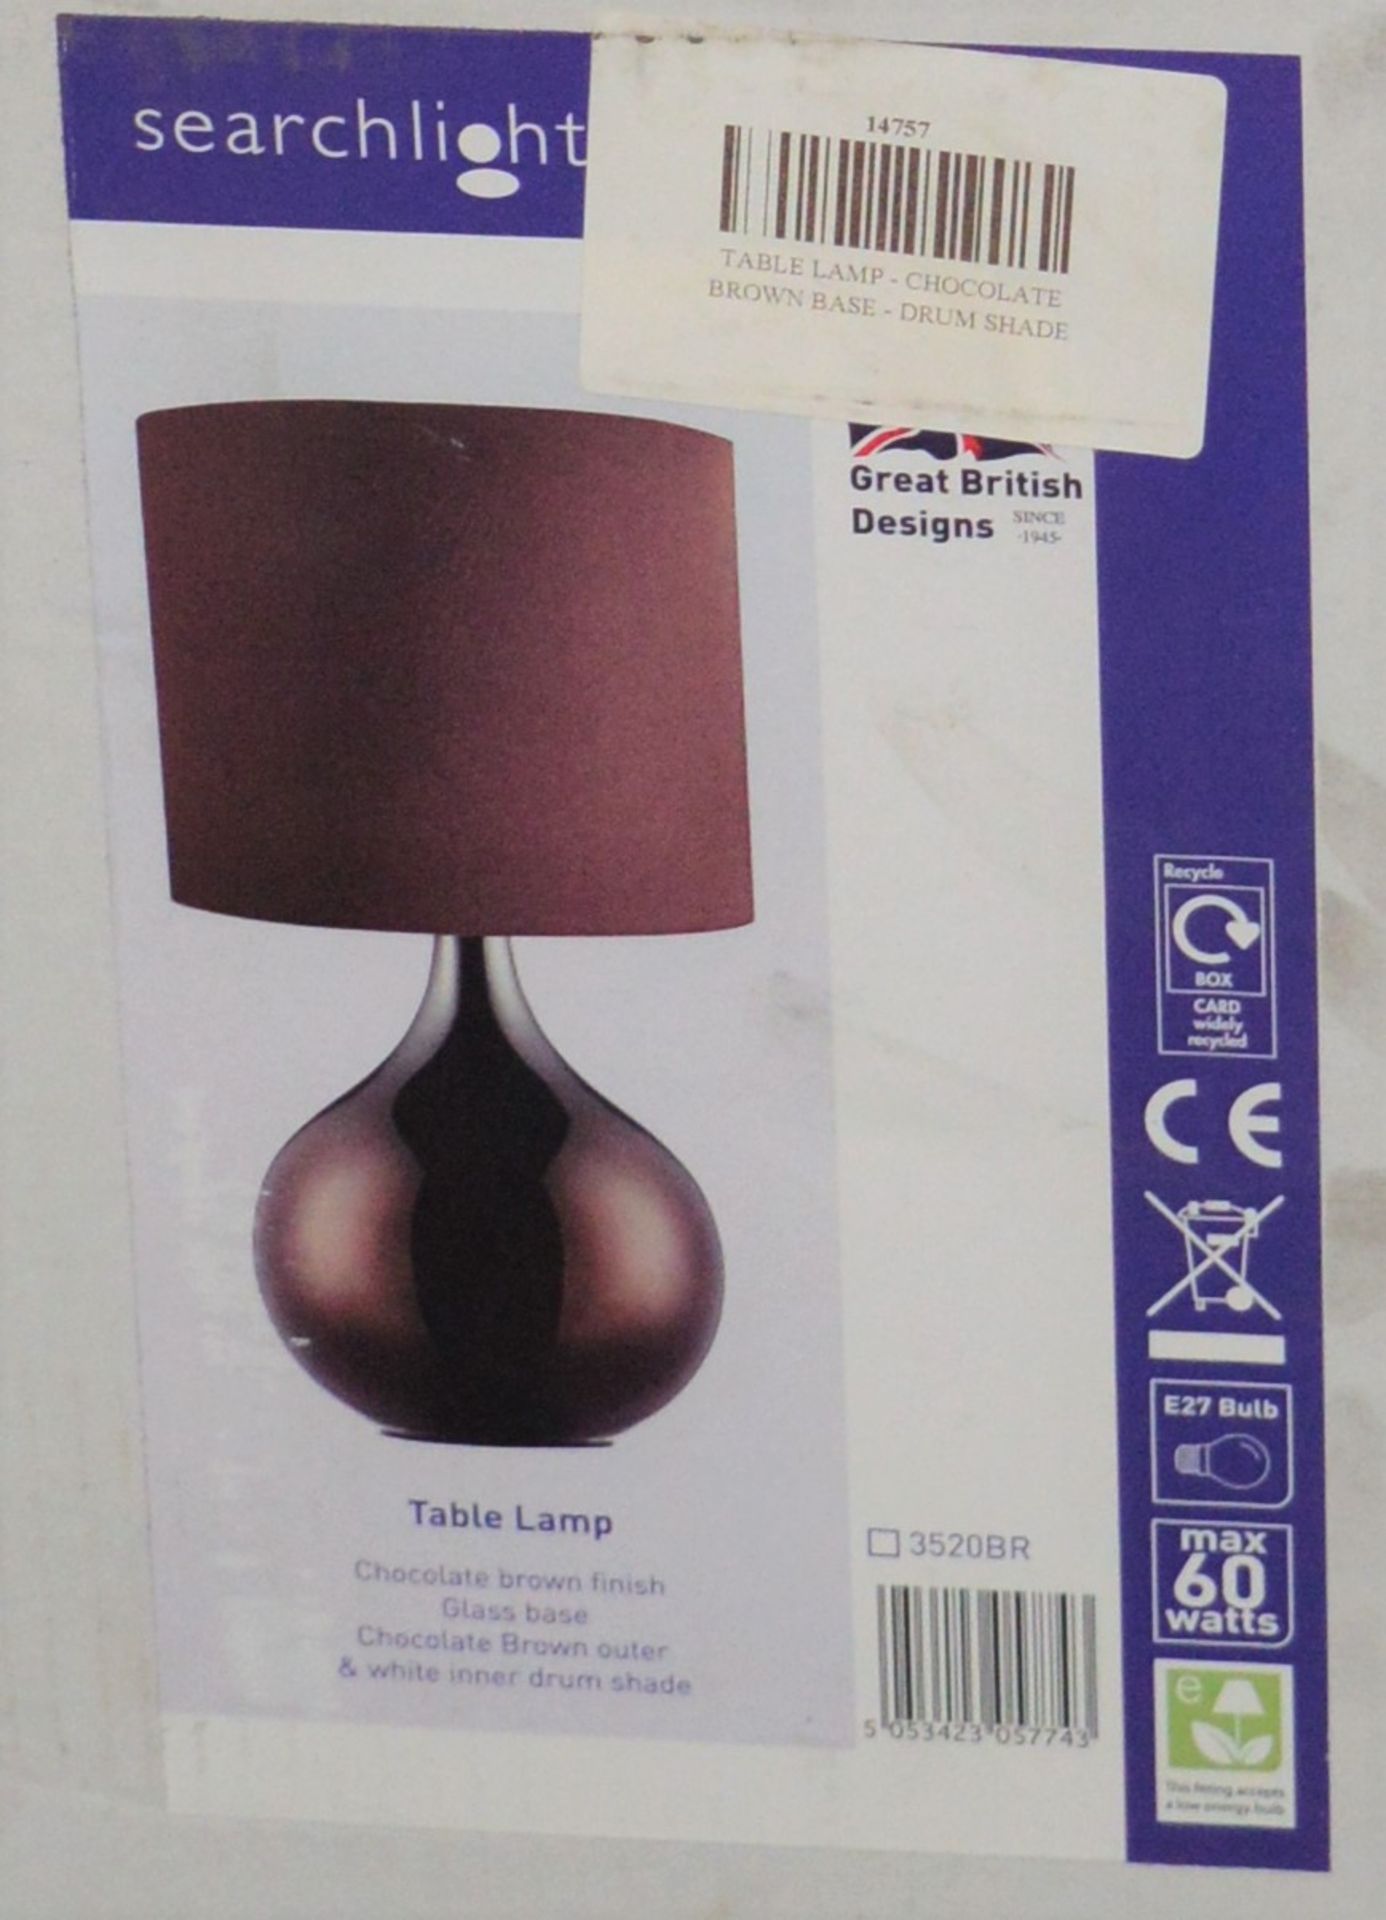 2 x Searchlight Table Lamps With Chocolate Brown Finish and Glass Bases and Drum Shades - Product